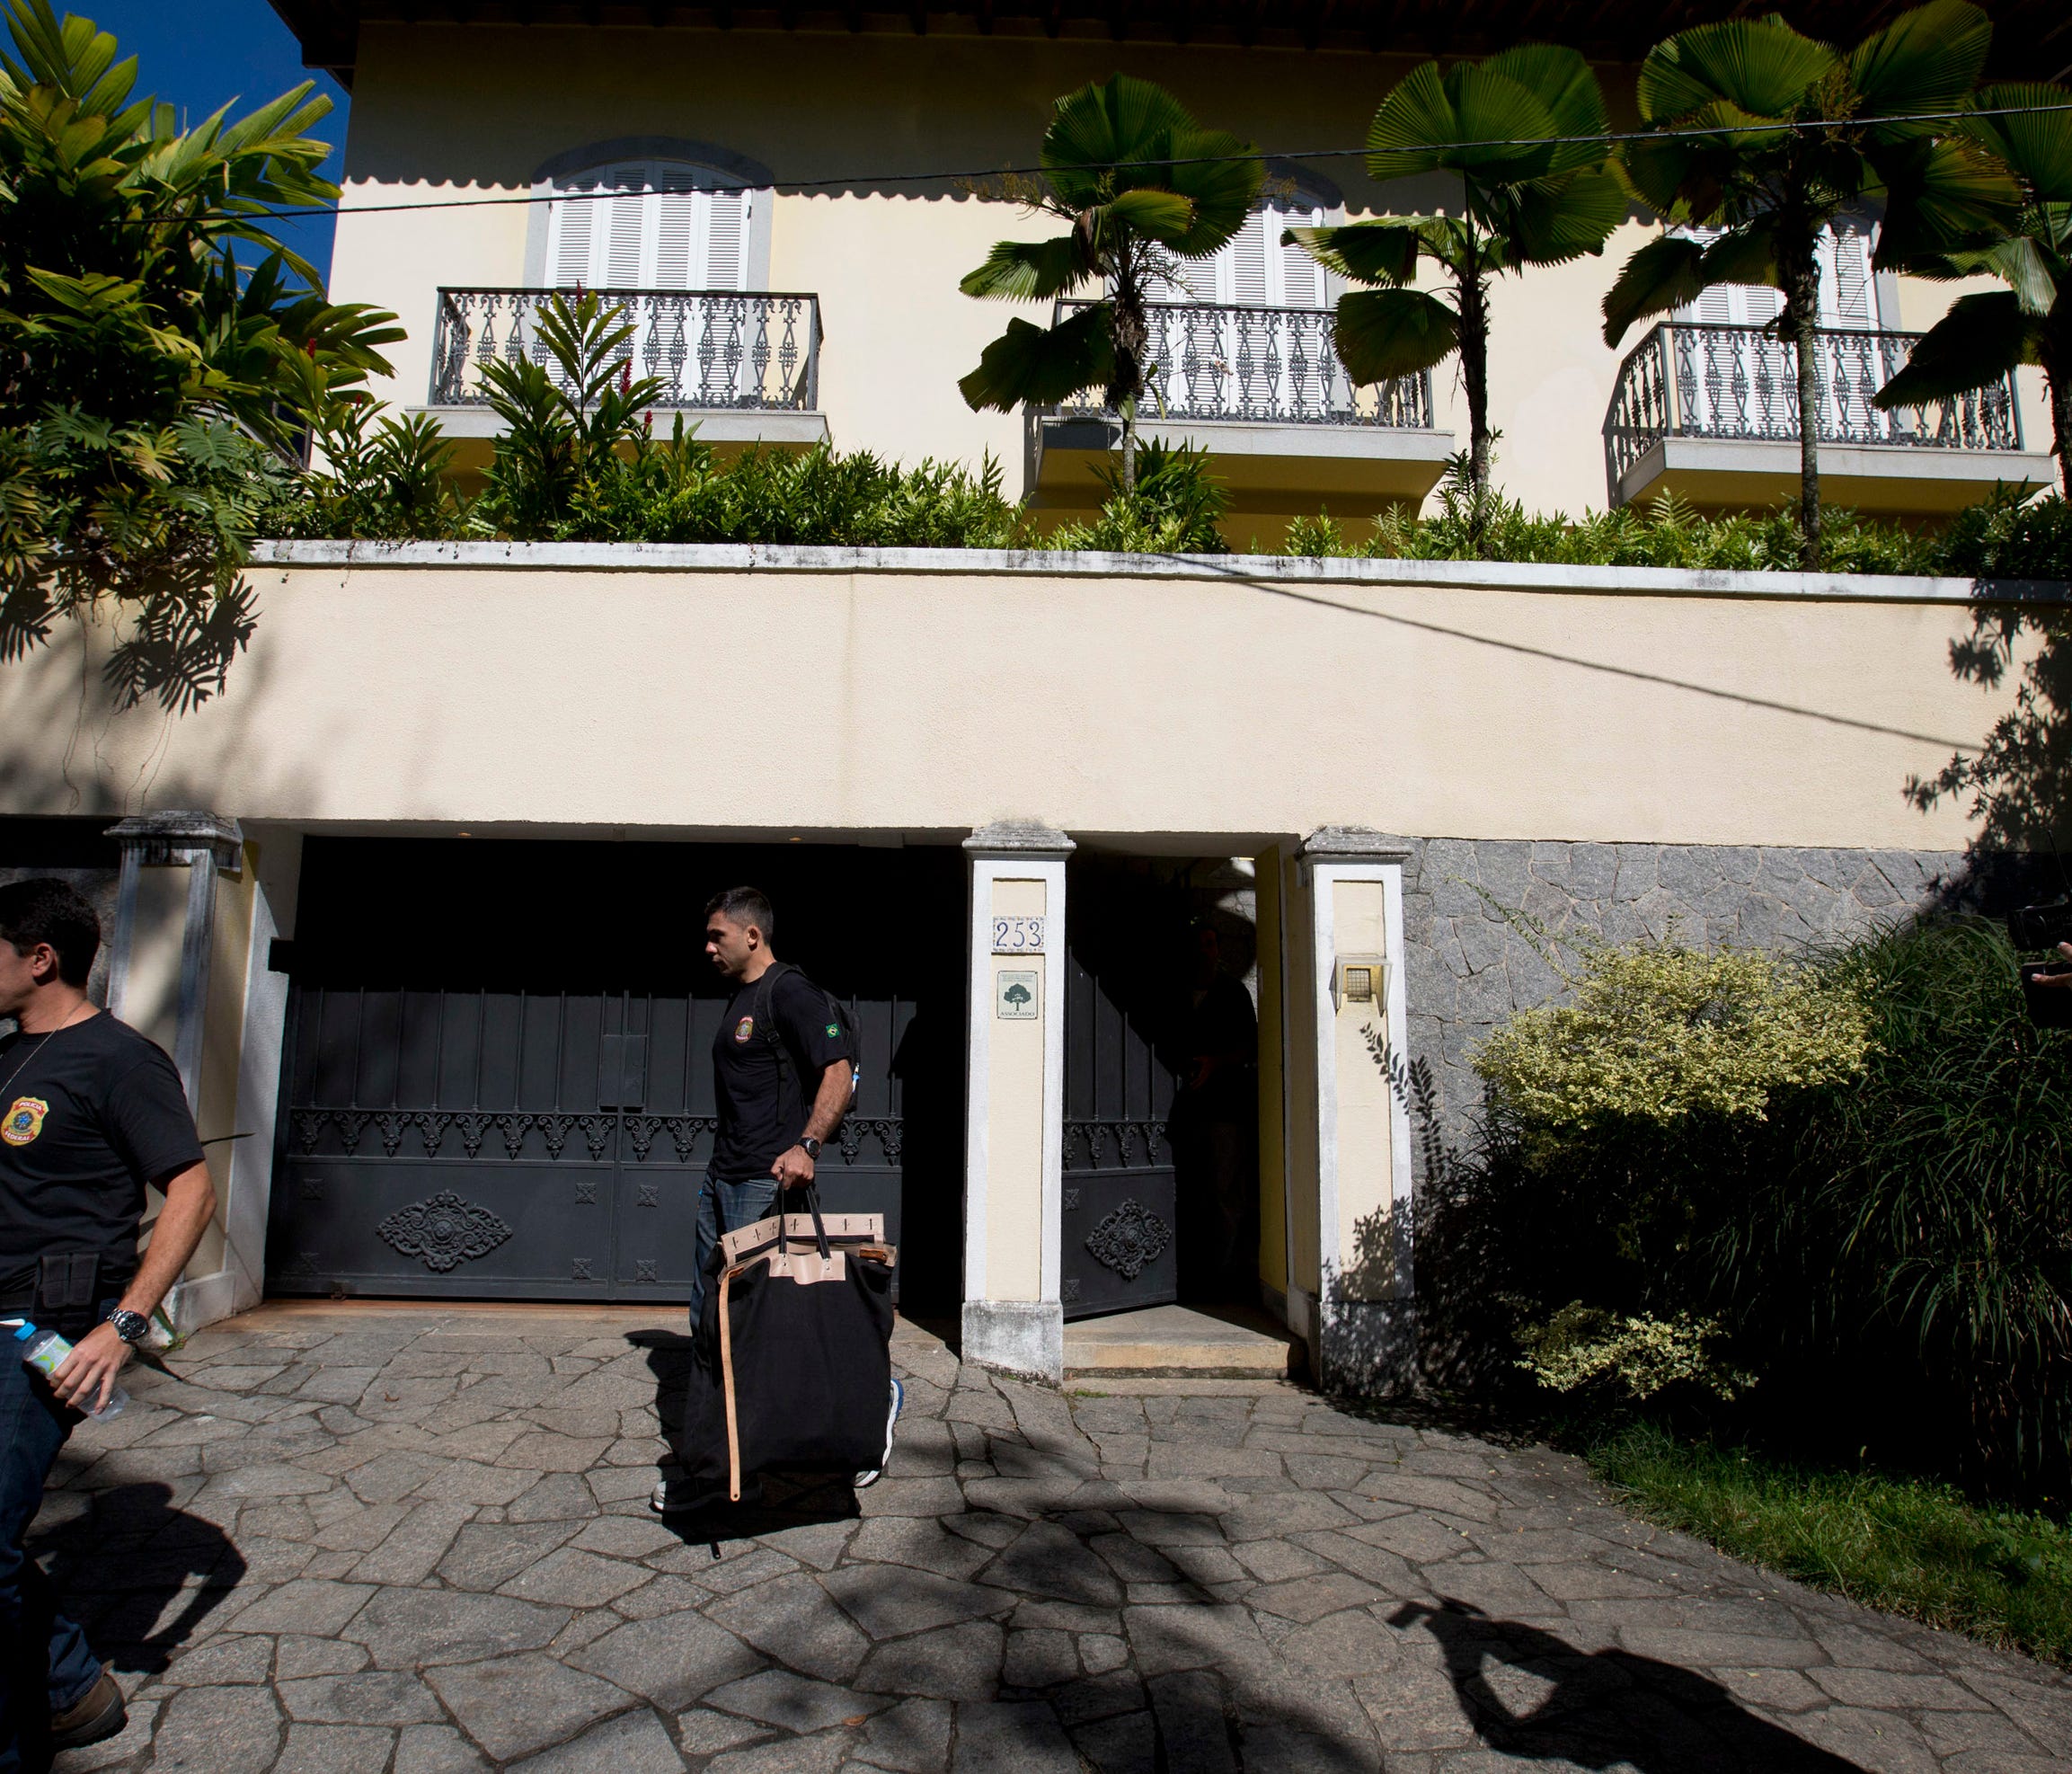 A Federal Police officer carries a bag filled with items confiscated from the home of Carlos Nuzman, president of the Brazilian Olympic committee, Tuesday, Sept. 5, 2017, in Rio de Janeiro, Brazil. Federal police searched Nuzman's house Tuesday morni